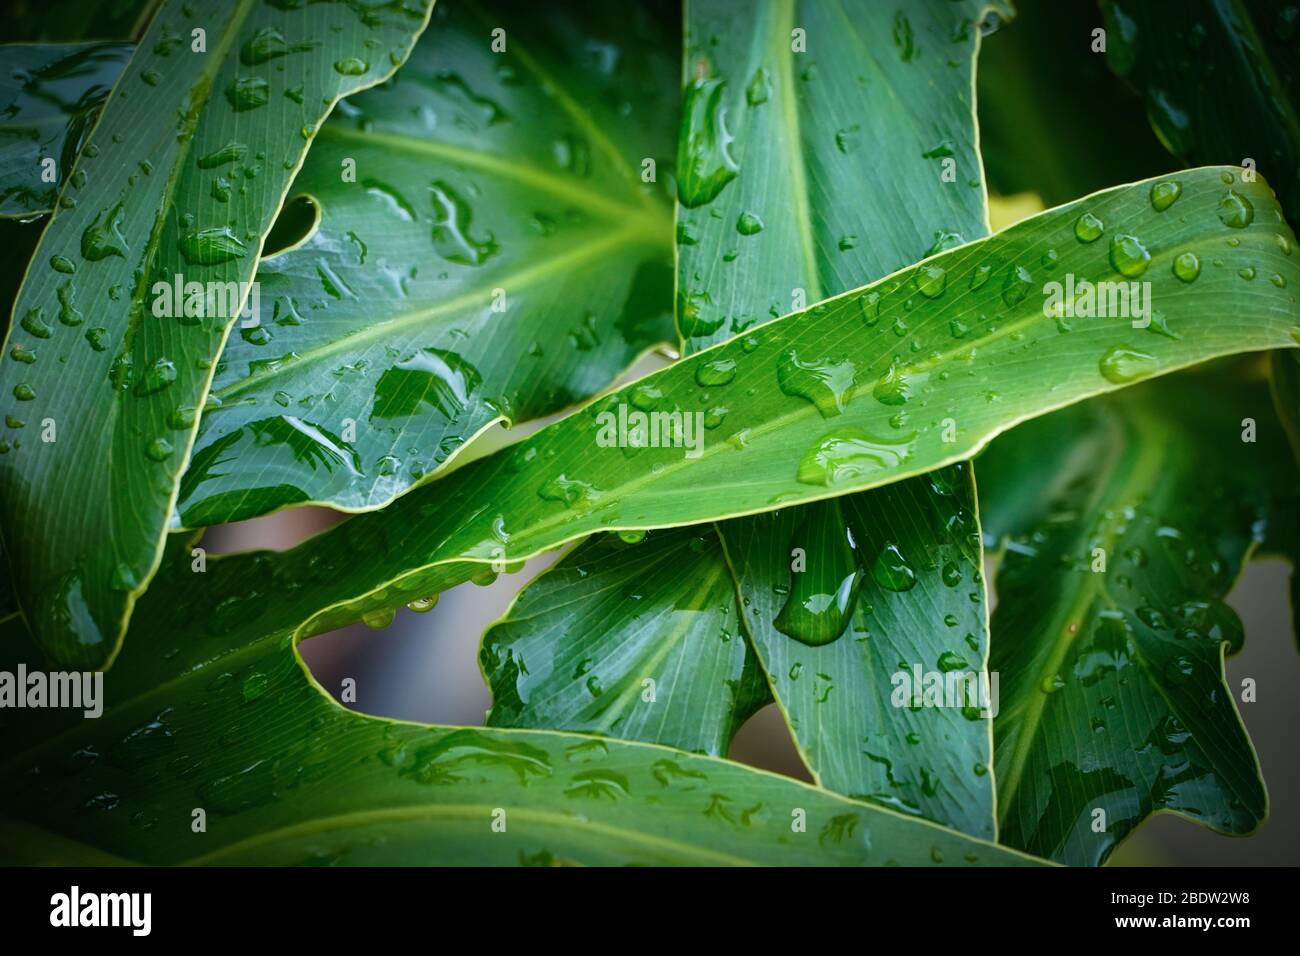 philodendron water droplets clipart